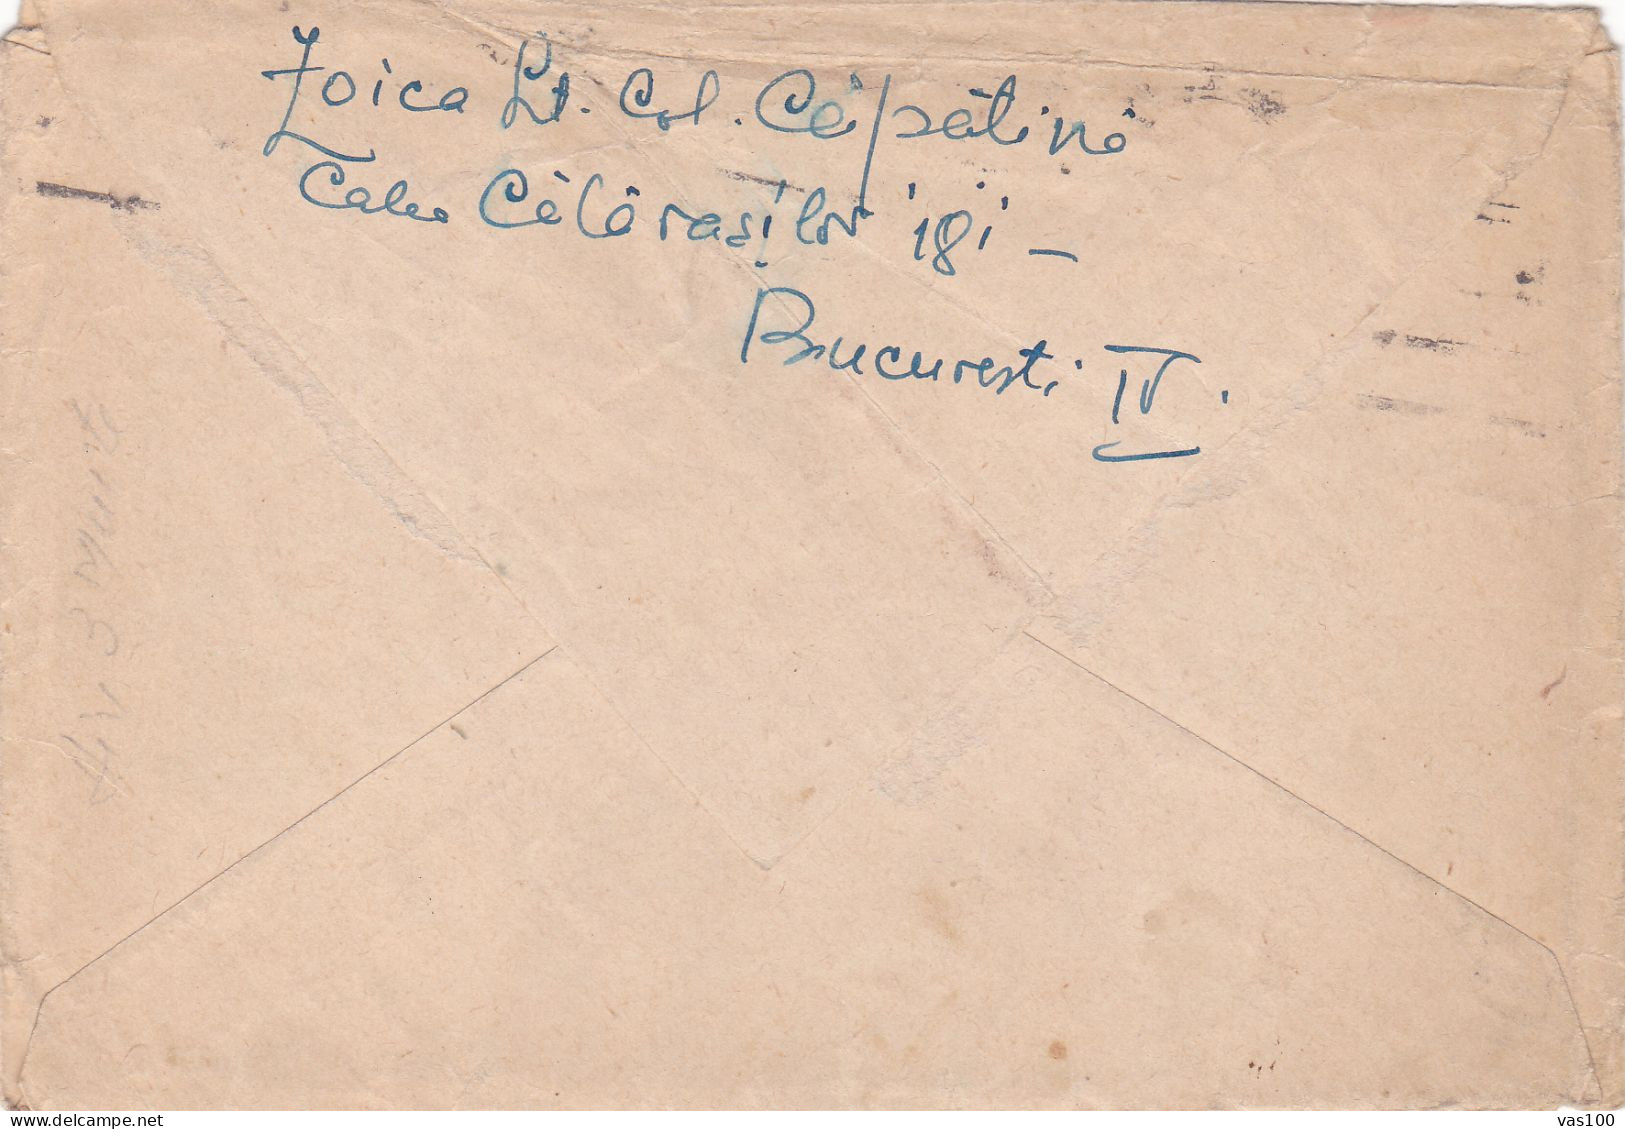 ROMANIA , 1945, WWII CENSORED,  ENVELOPE SENDED TO BATTLEFIELD - World War 2 Letters